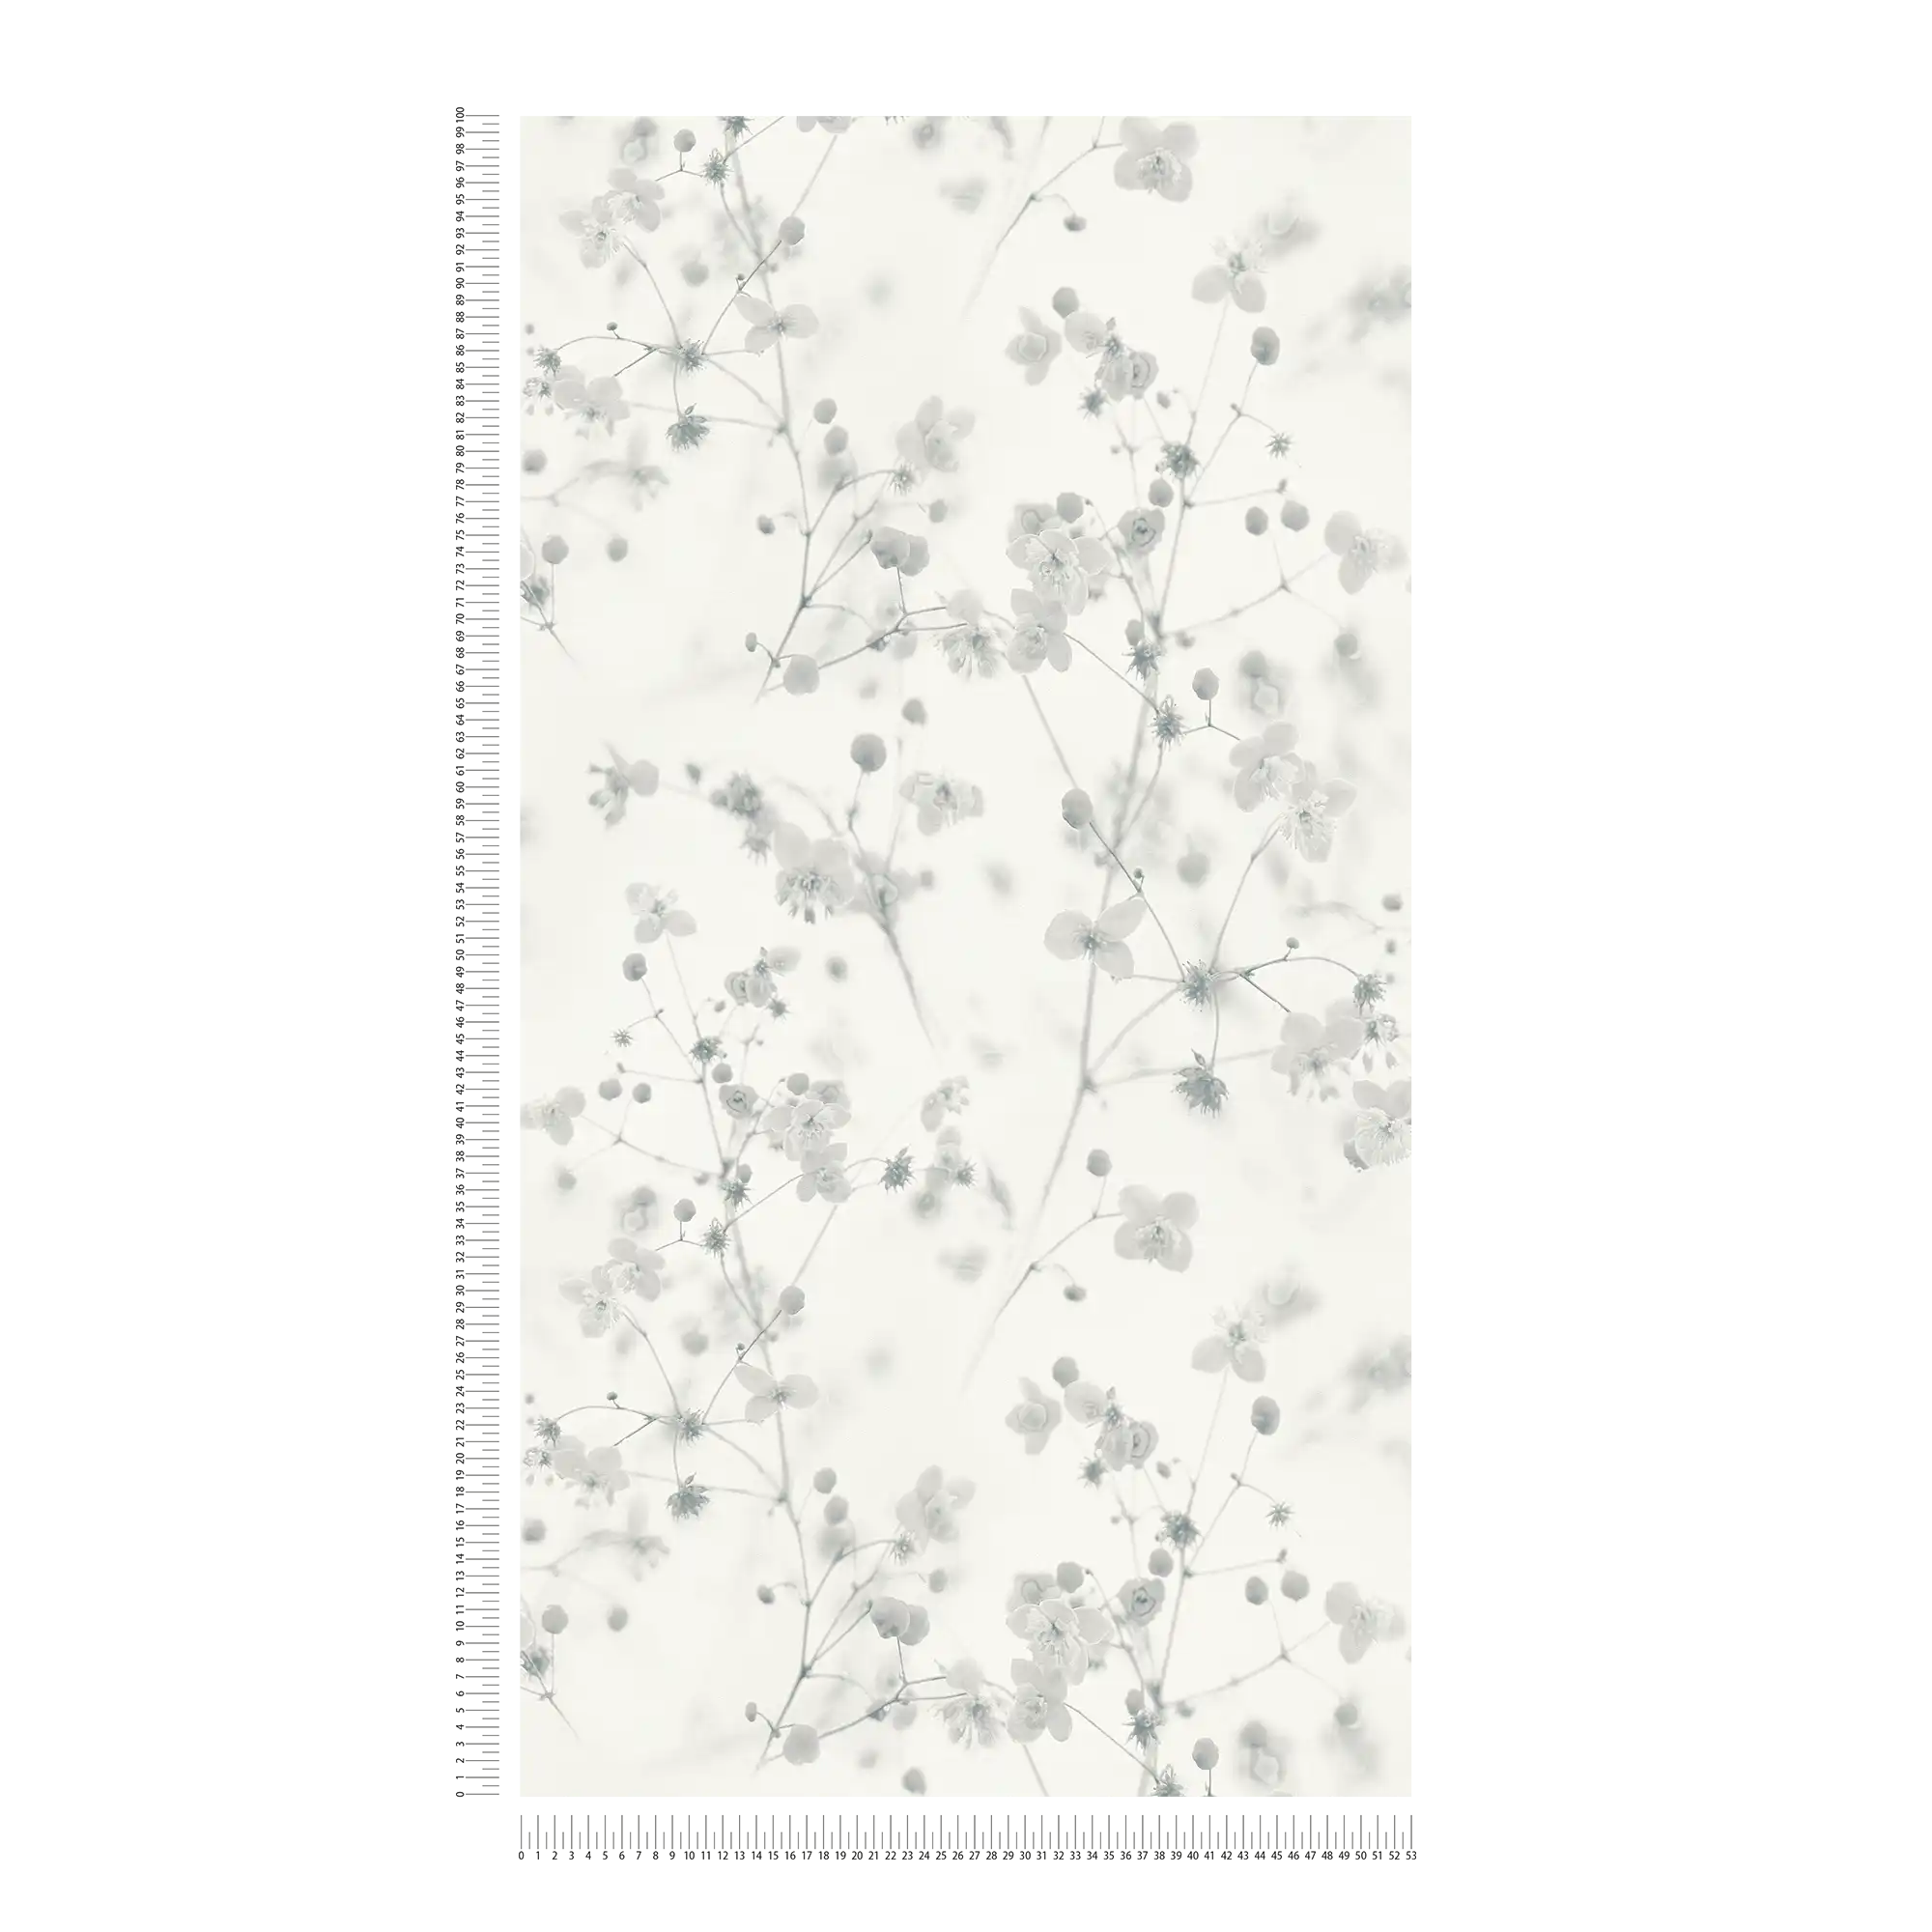             Grey floral wallpaper modern country style
        